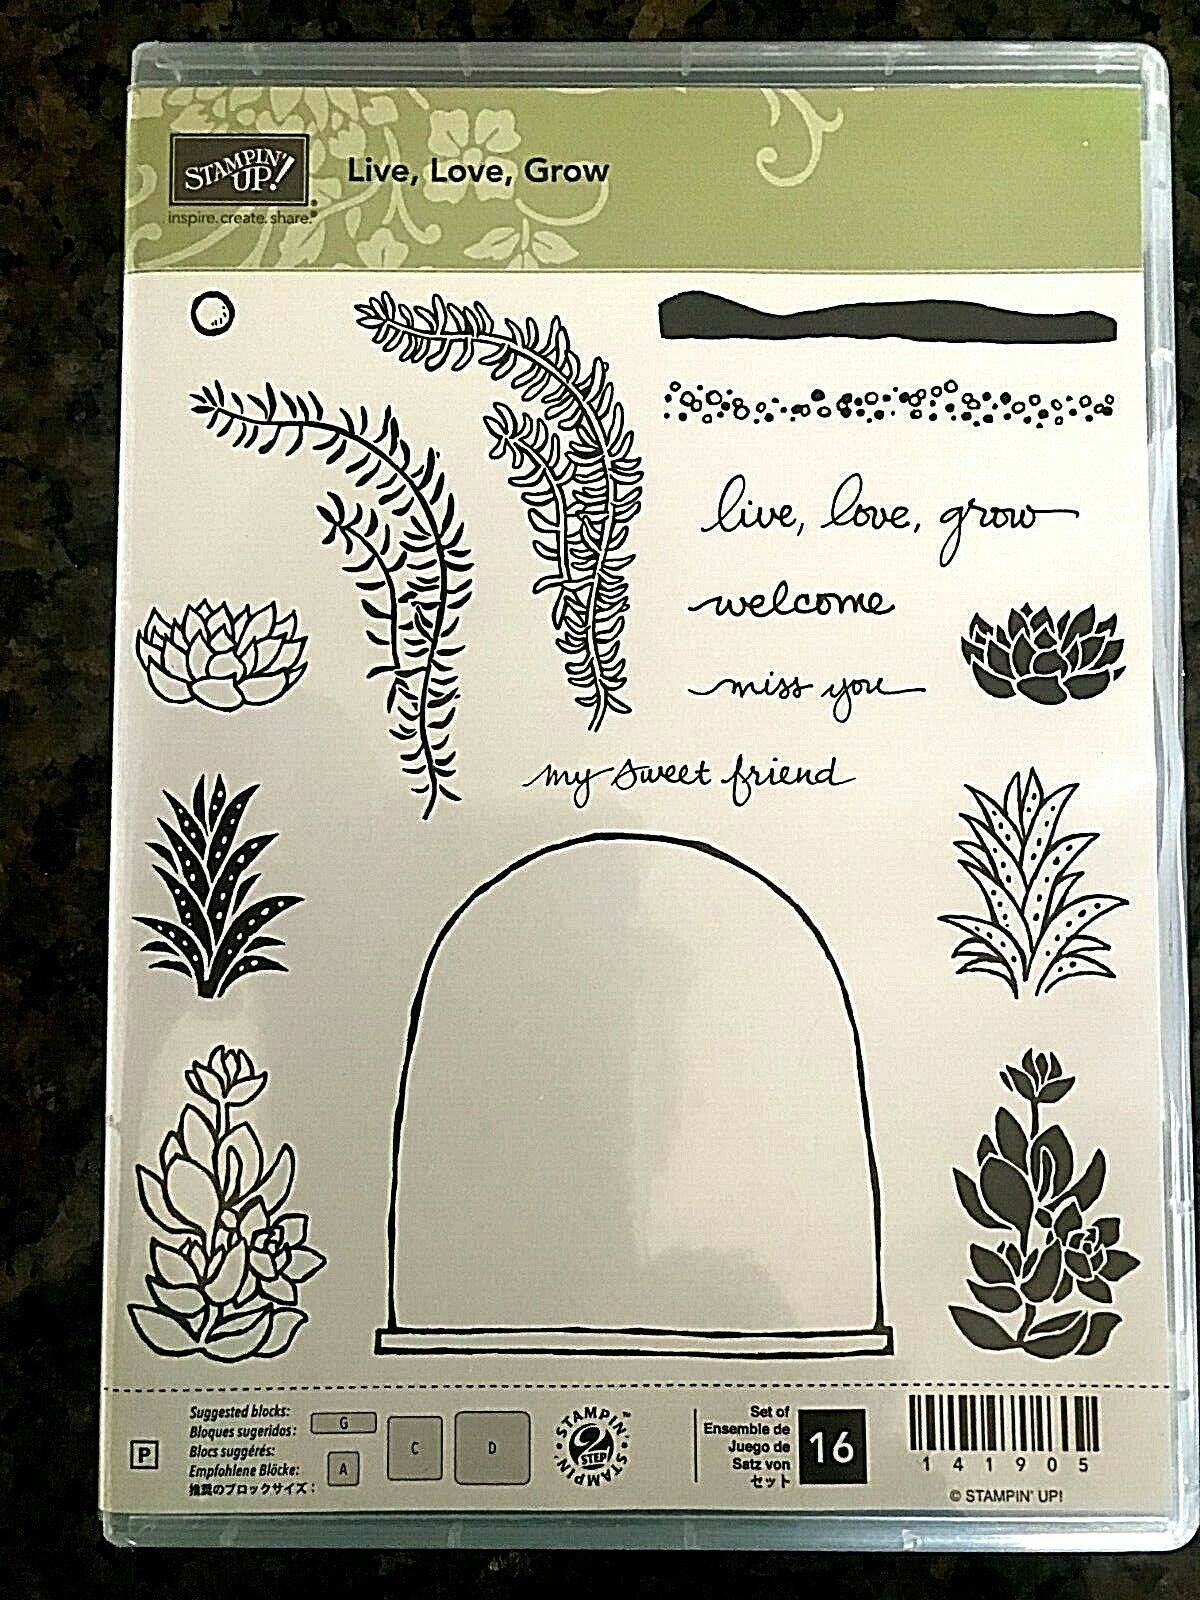 Stampin Up! 16 Piece "live, Love, Grow" Stamps - Retired - Gently Used